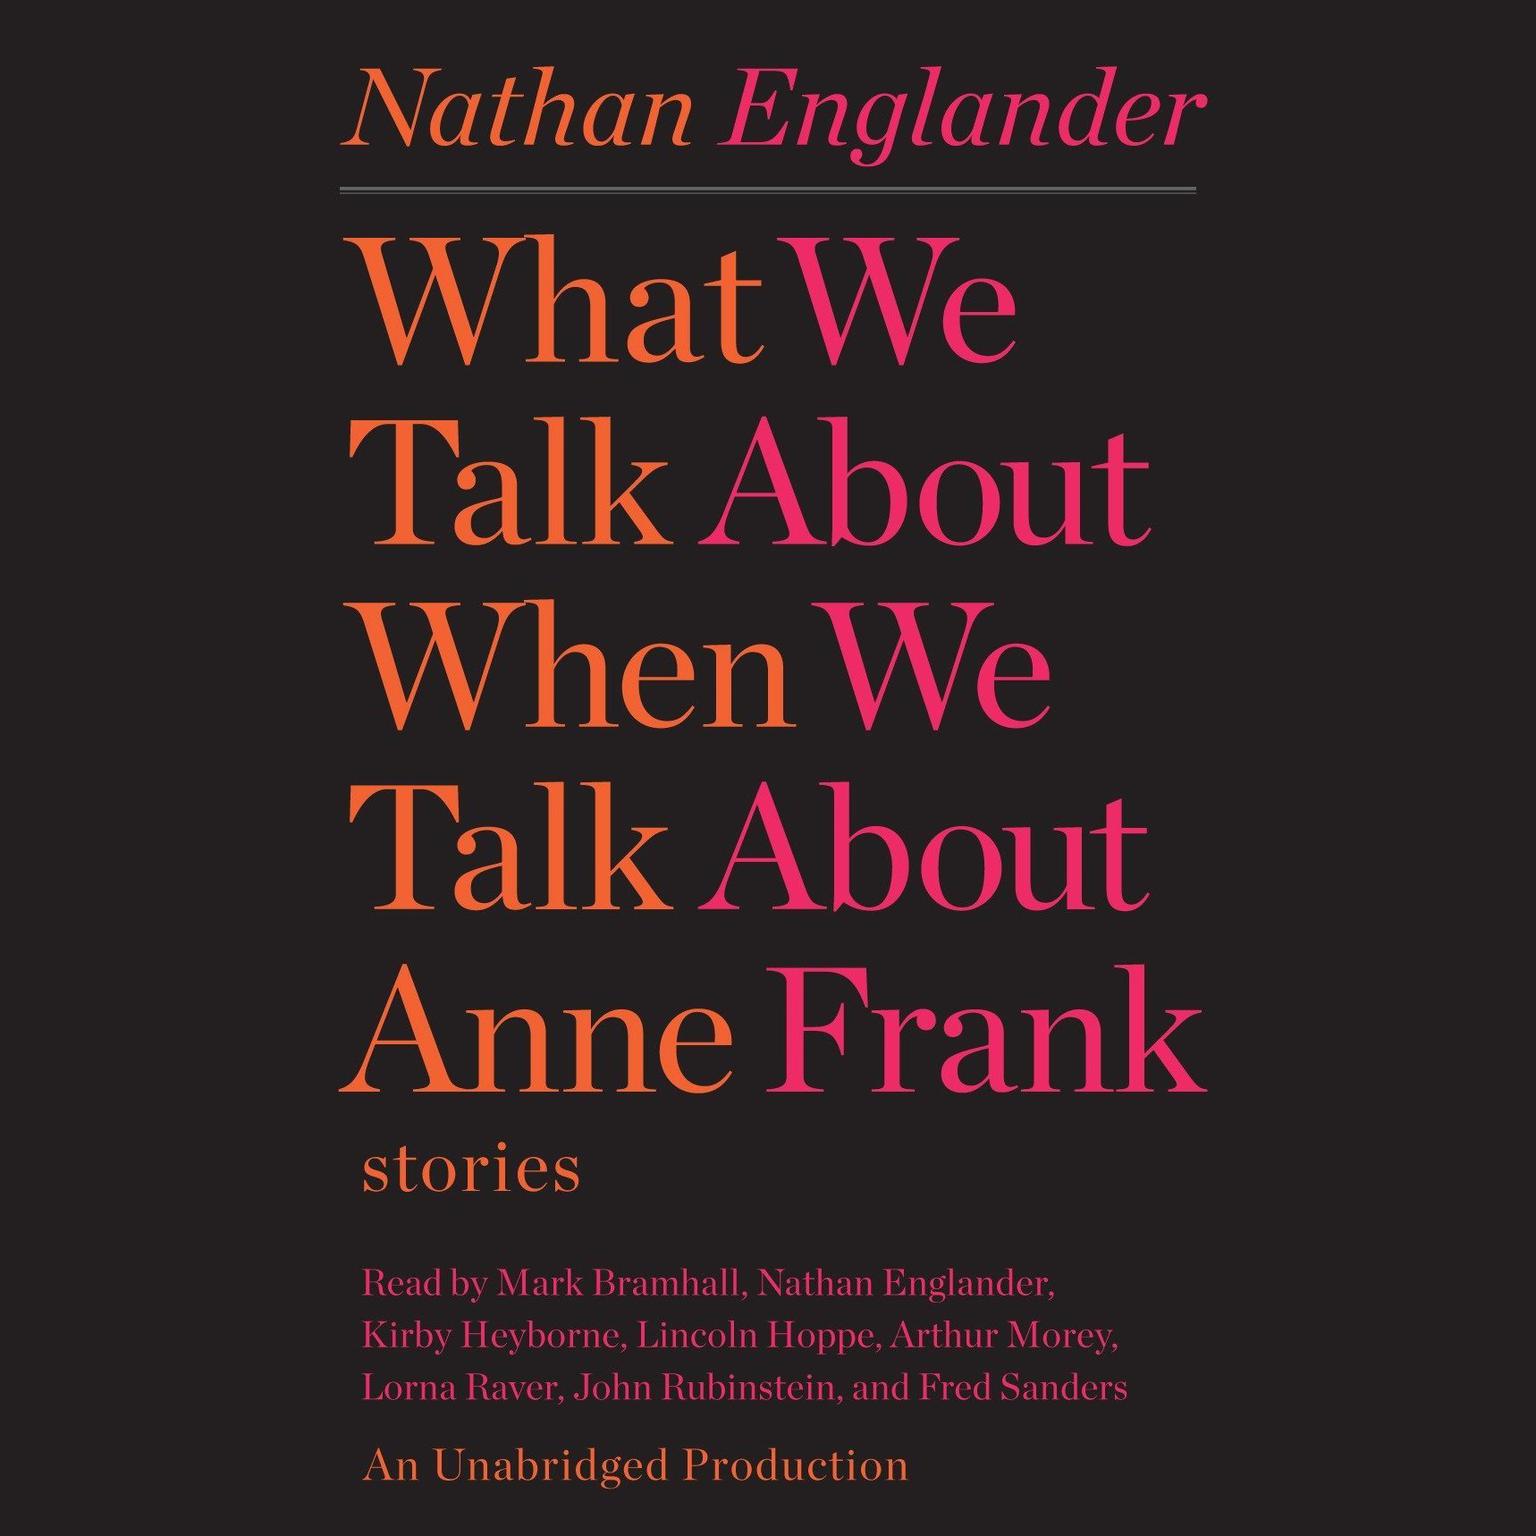 What We Talk About When We Talk About Anne Frank: Stories Audiobook, by Nathan Englander